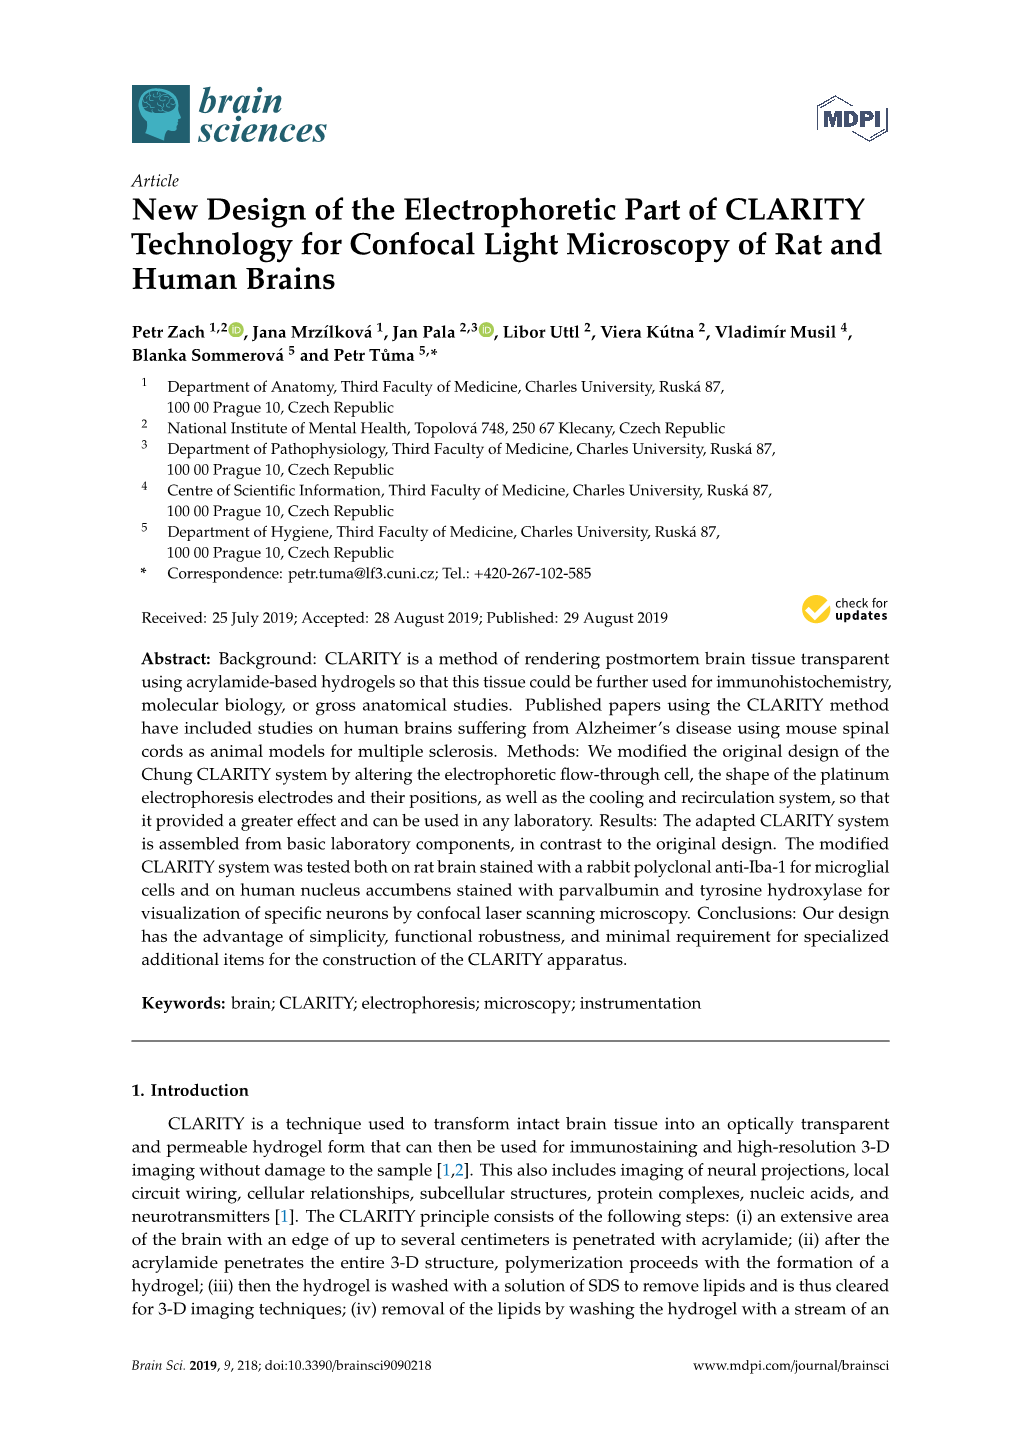 New Design of the Electrophoretic Part of CLARITY Technology for Confocal Light Microscopy of Rat and Human Brains